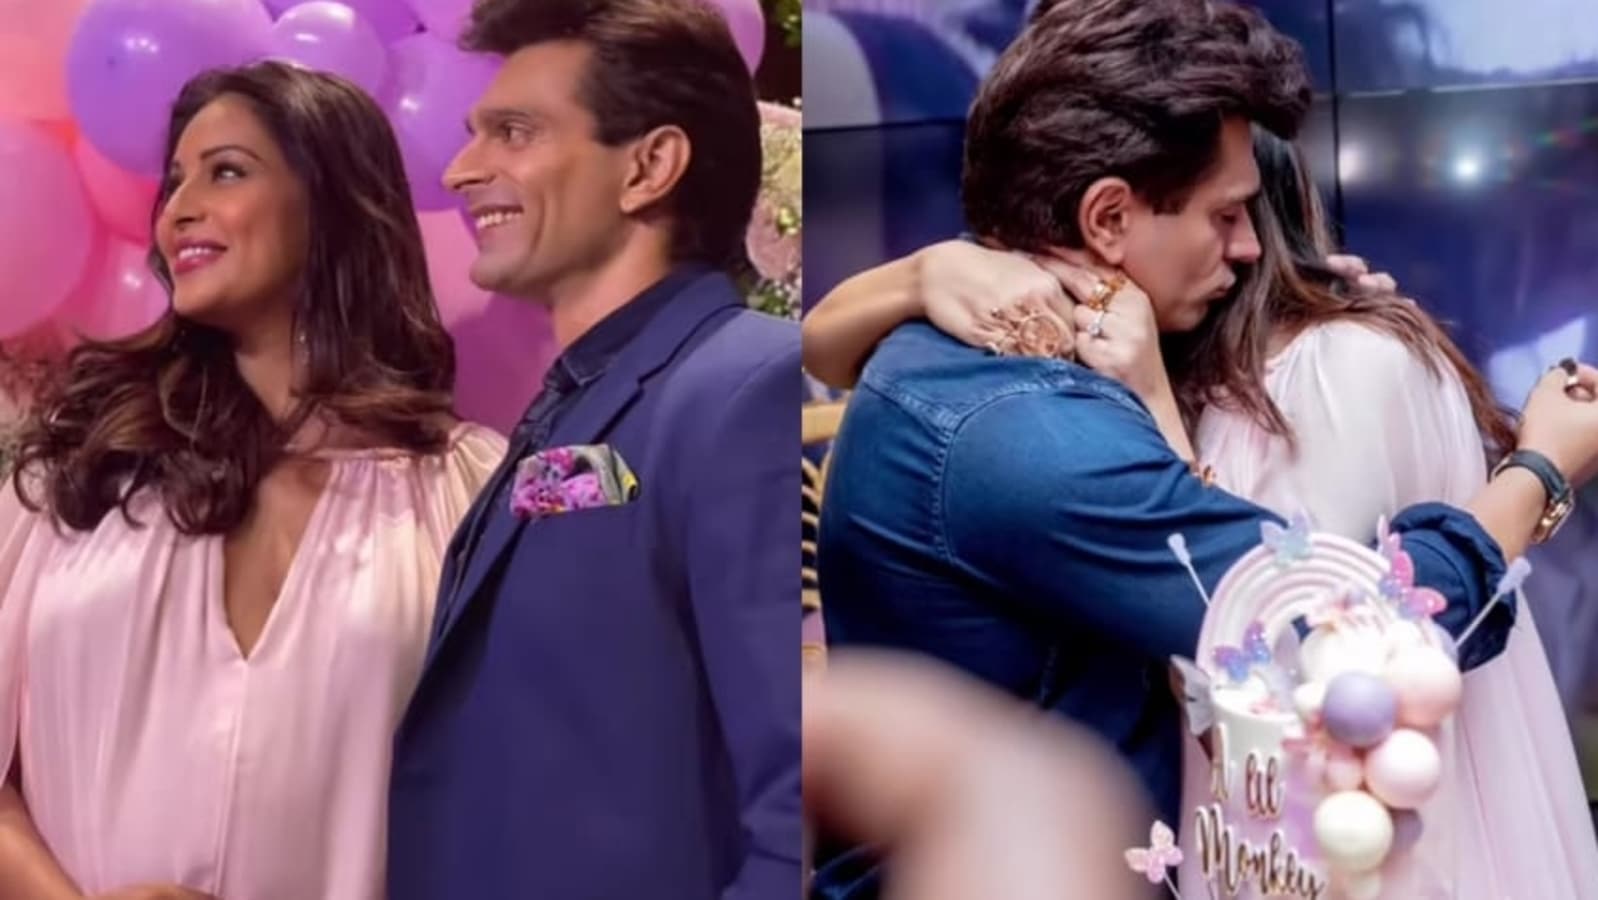 Inside Bipasha Basu and Karan Singh Grover’s pretty, pastel baby shower filled with hugs, kisses, dancing celebs. Watch